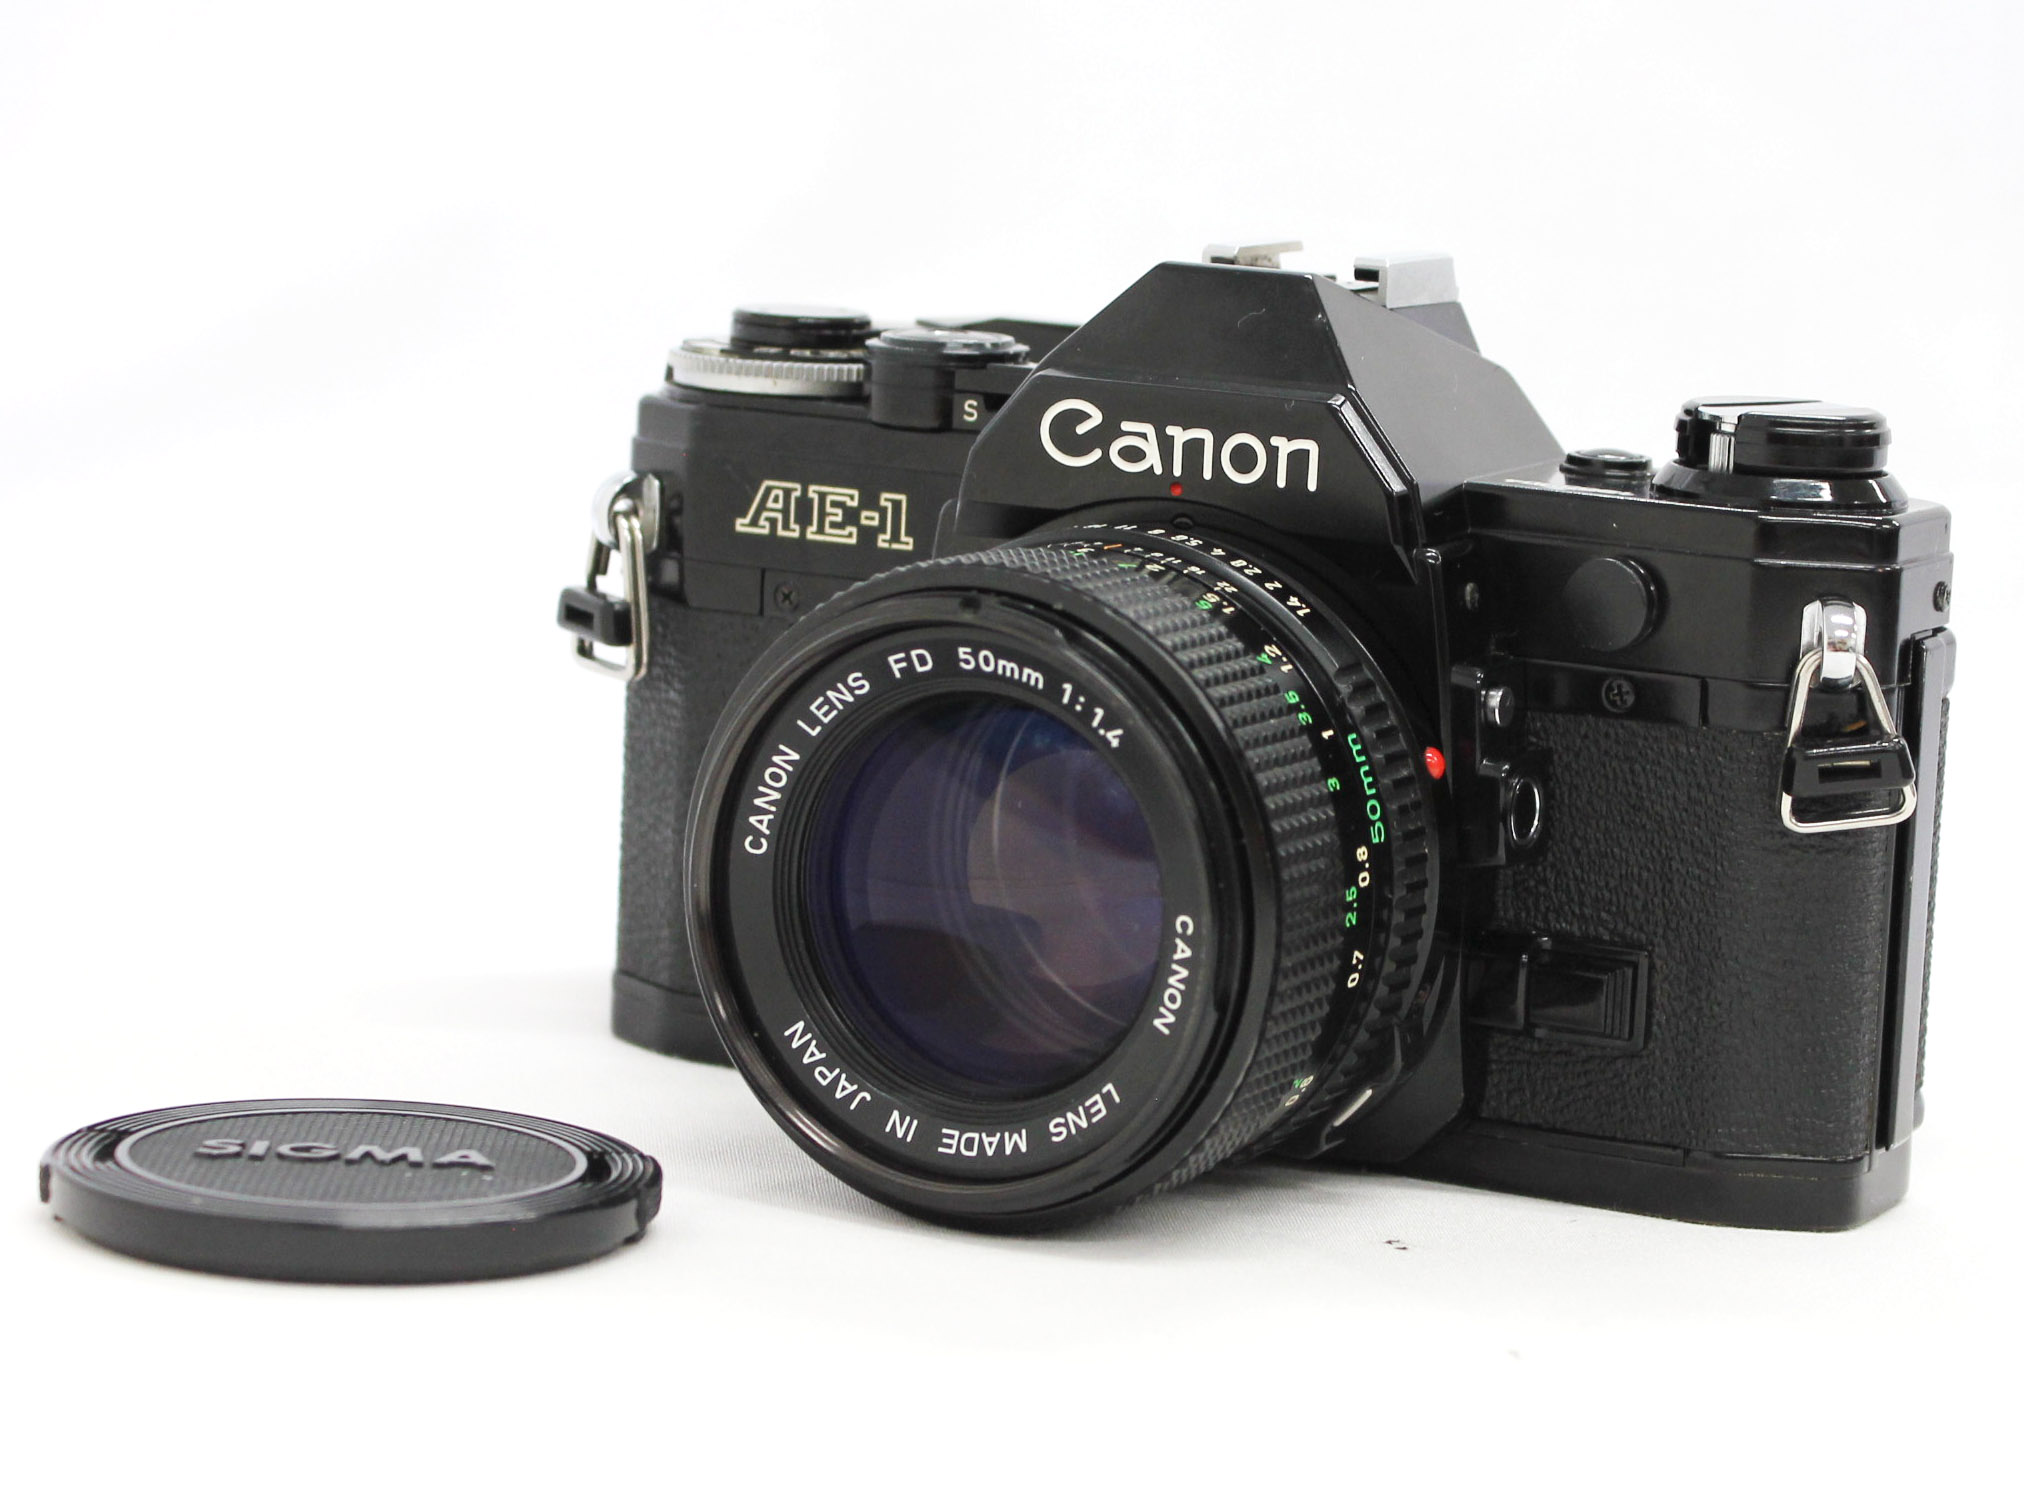 Japan Used Camera Shop | [Exc++++] Canon AE-1 35mm SLR Film Camera Black with New FD NFD 50mm F/1.4 Lens from Japan